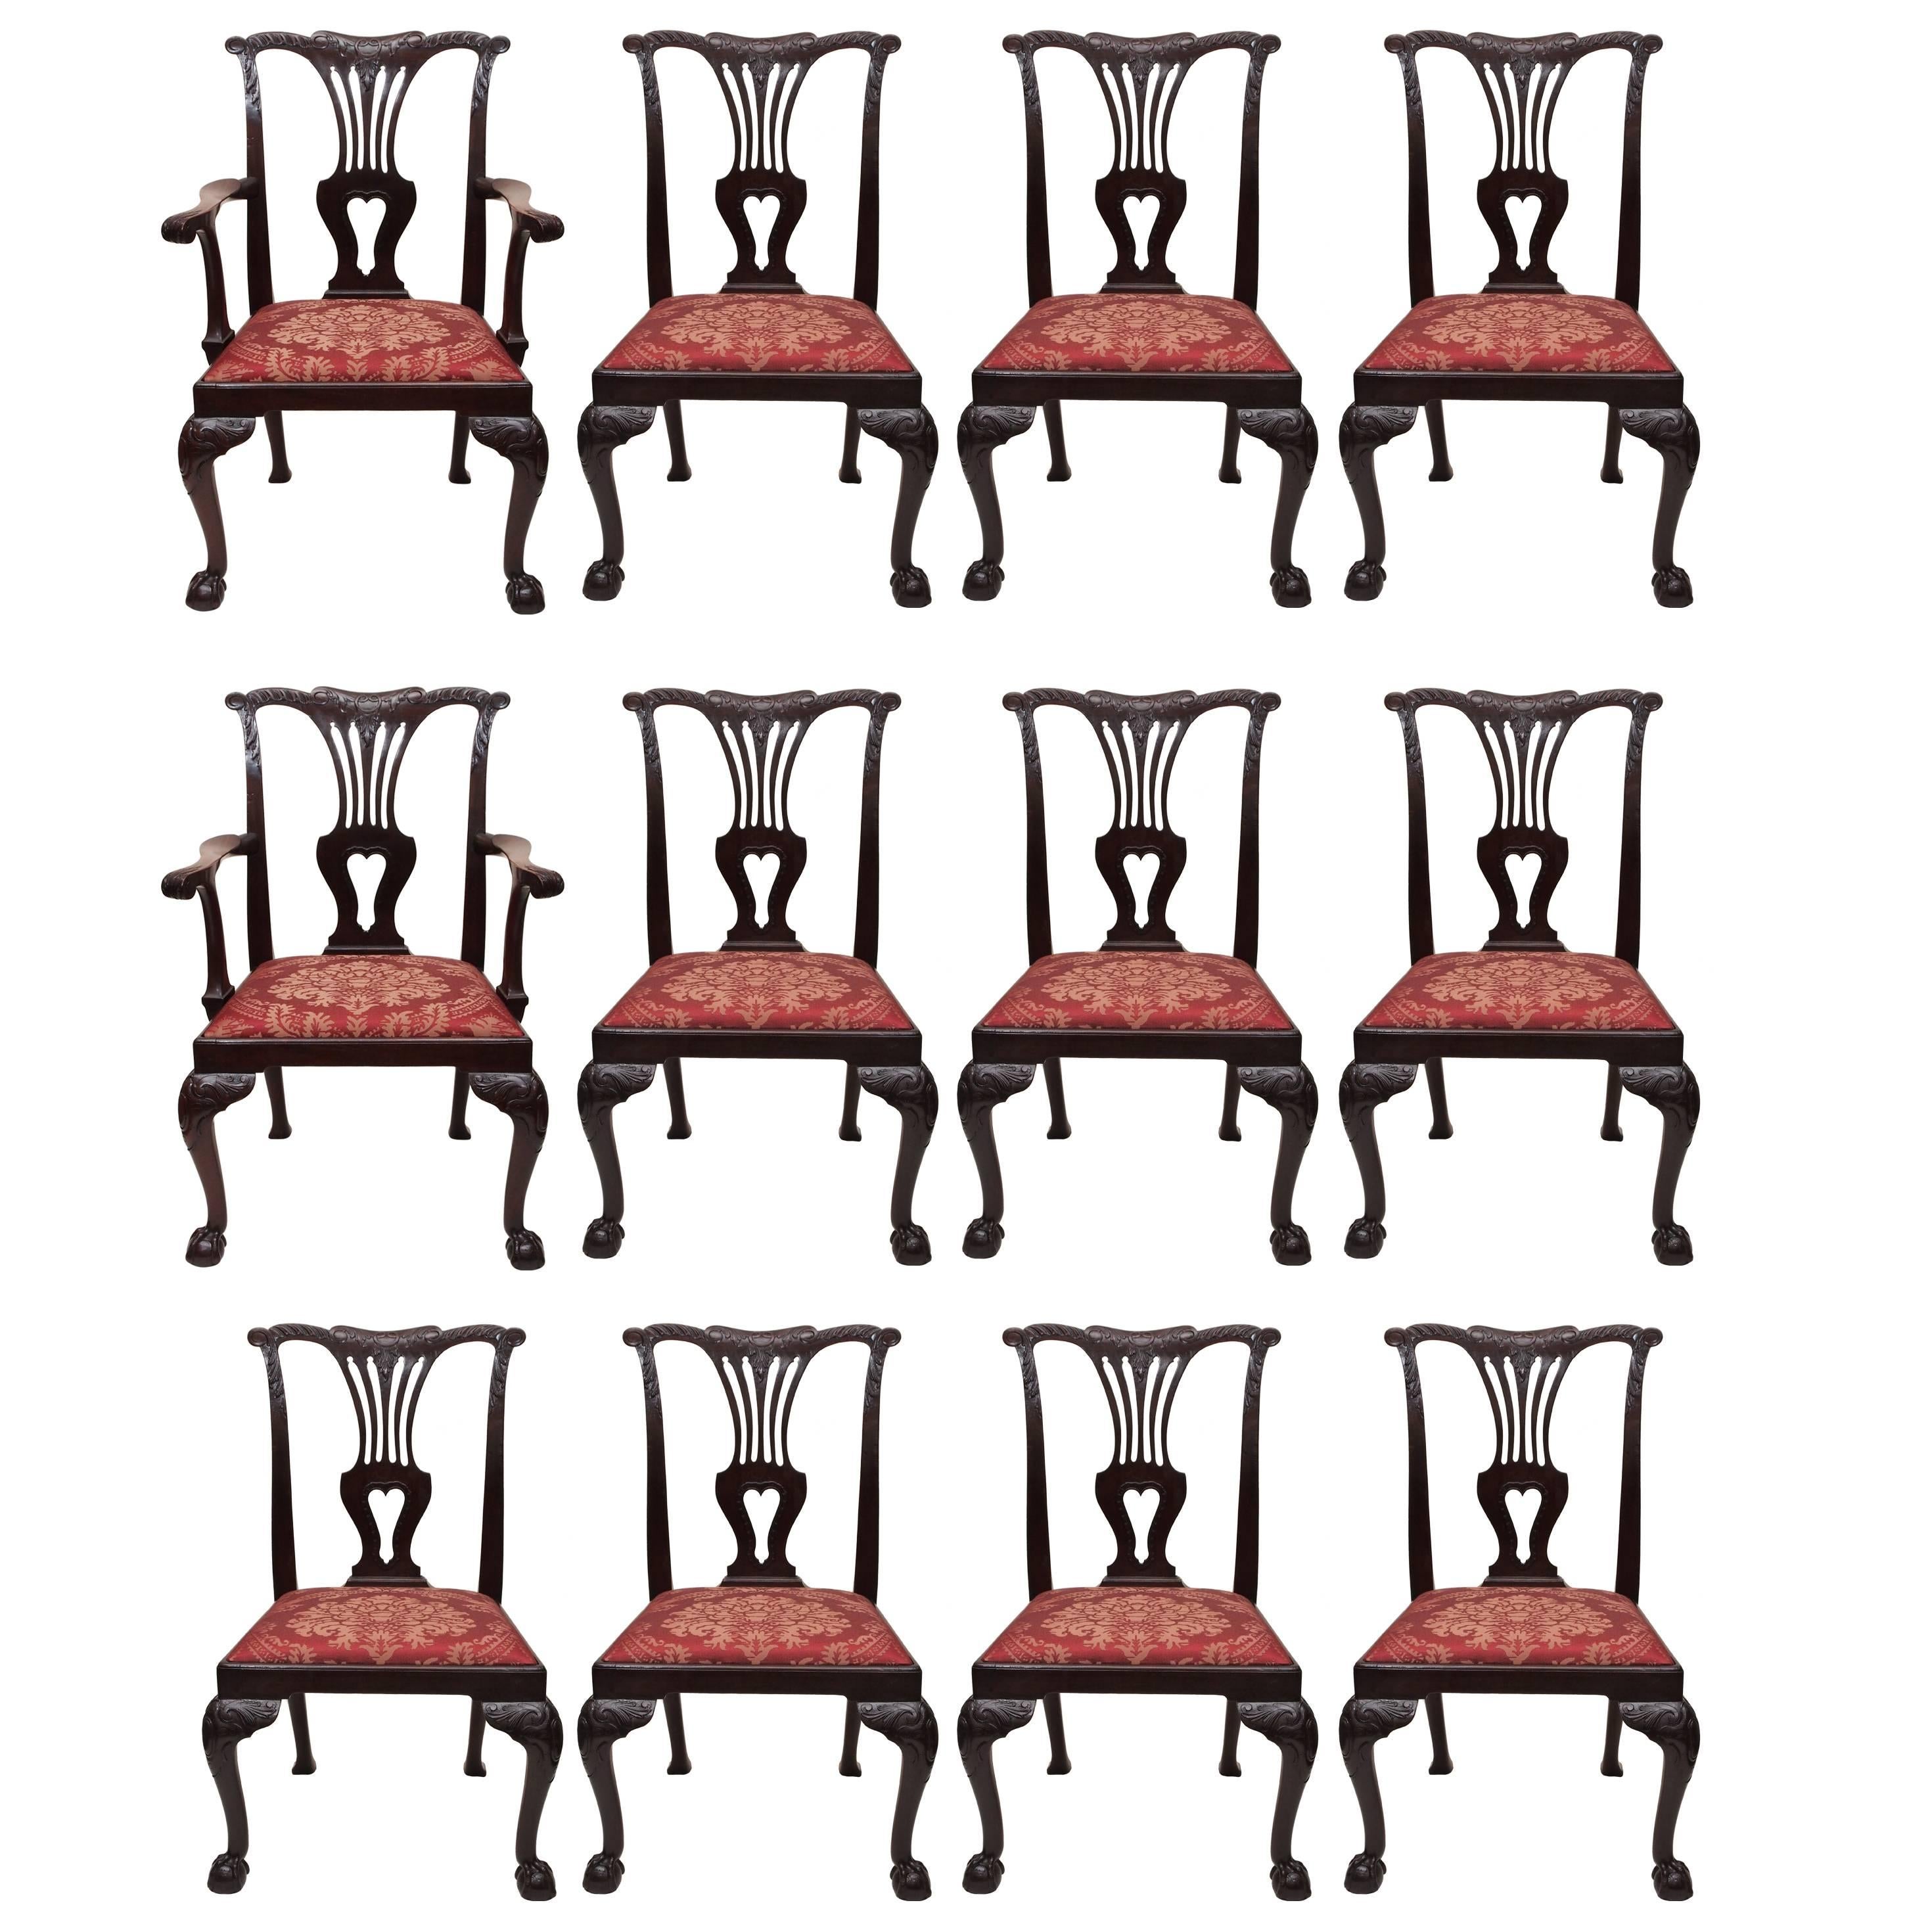 Set of 12 Antique English Mahogany 19th Century Dining Chairs